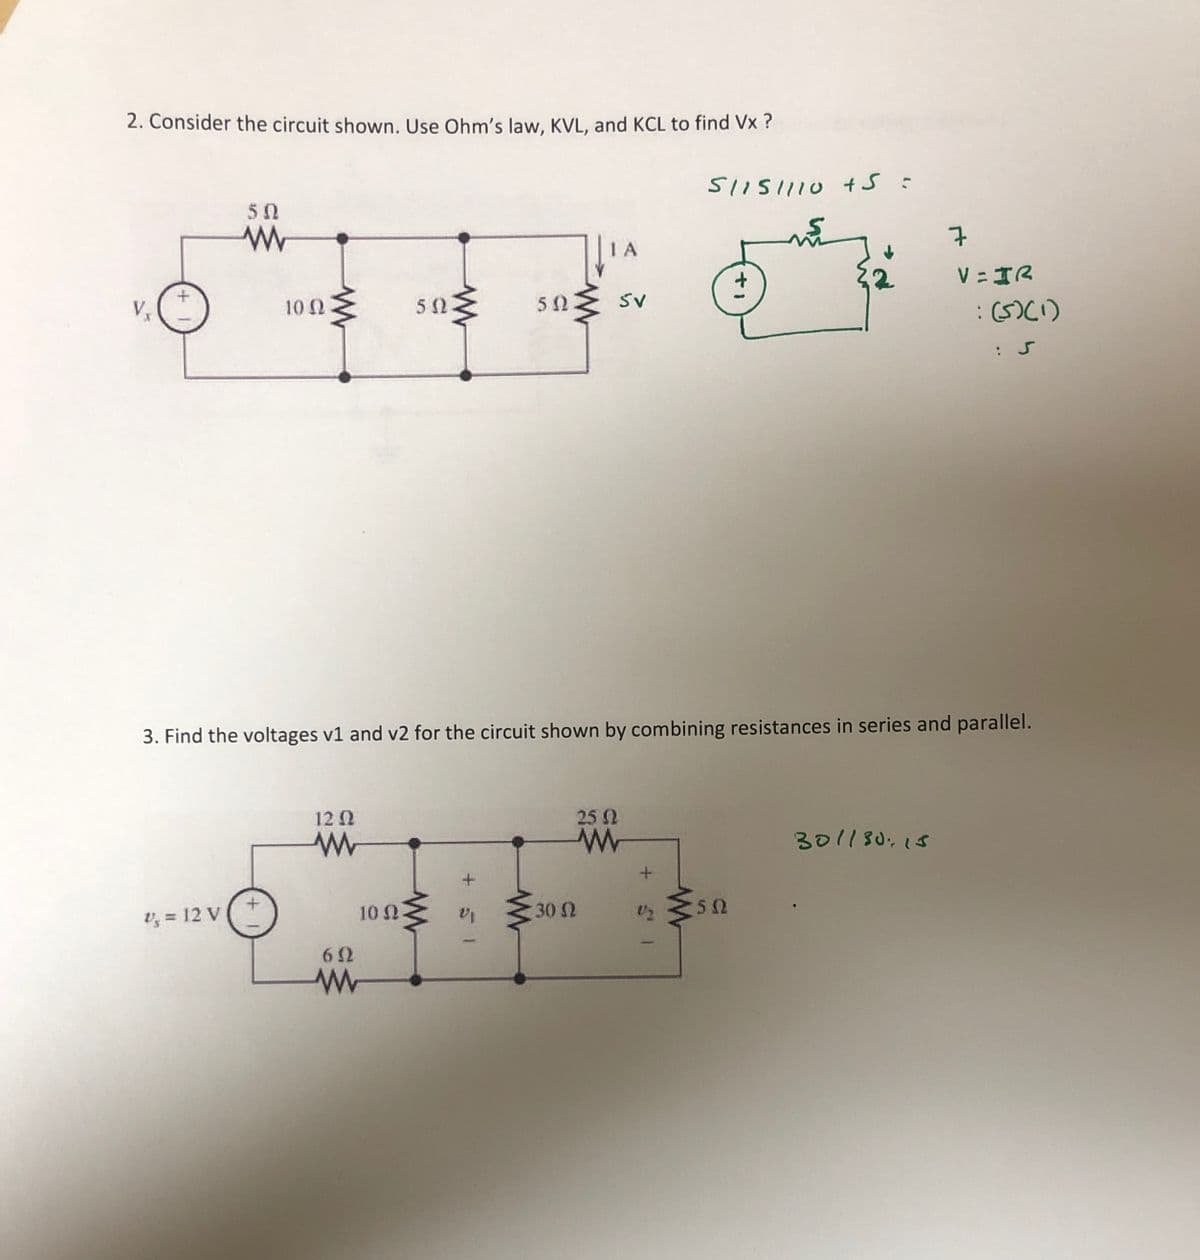 2. Consider the circuit shown. Use Ohm's law, KVL, and KCL to find Vx ?
51IS1110 +S :
50
1 A
7
V =IR
10 2
50
50 Sv
:(5)(1)
: S
3. Find the voltages v1 and v2 for the circuit shown by combining resistances in series and parallel.
12 2
25 2
301180,15
v, = 12 V
10 2
30 2
50
+ 51
